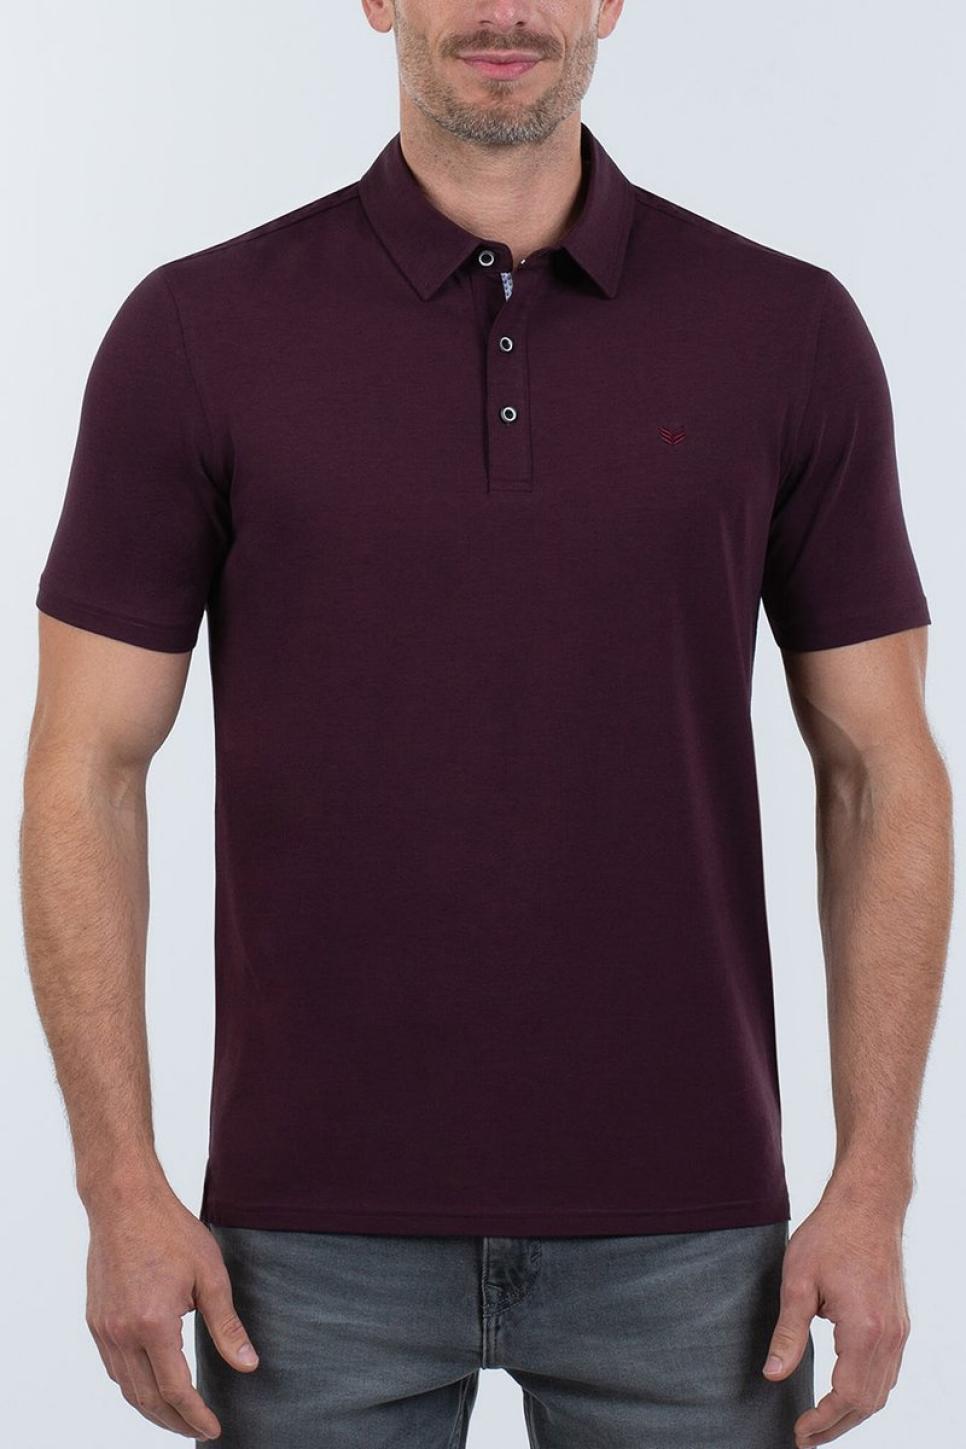 Buttercloth Balboa Journey Polo In Icy Cotton